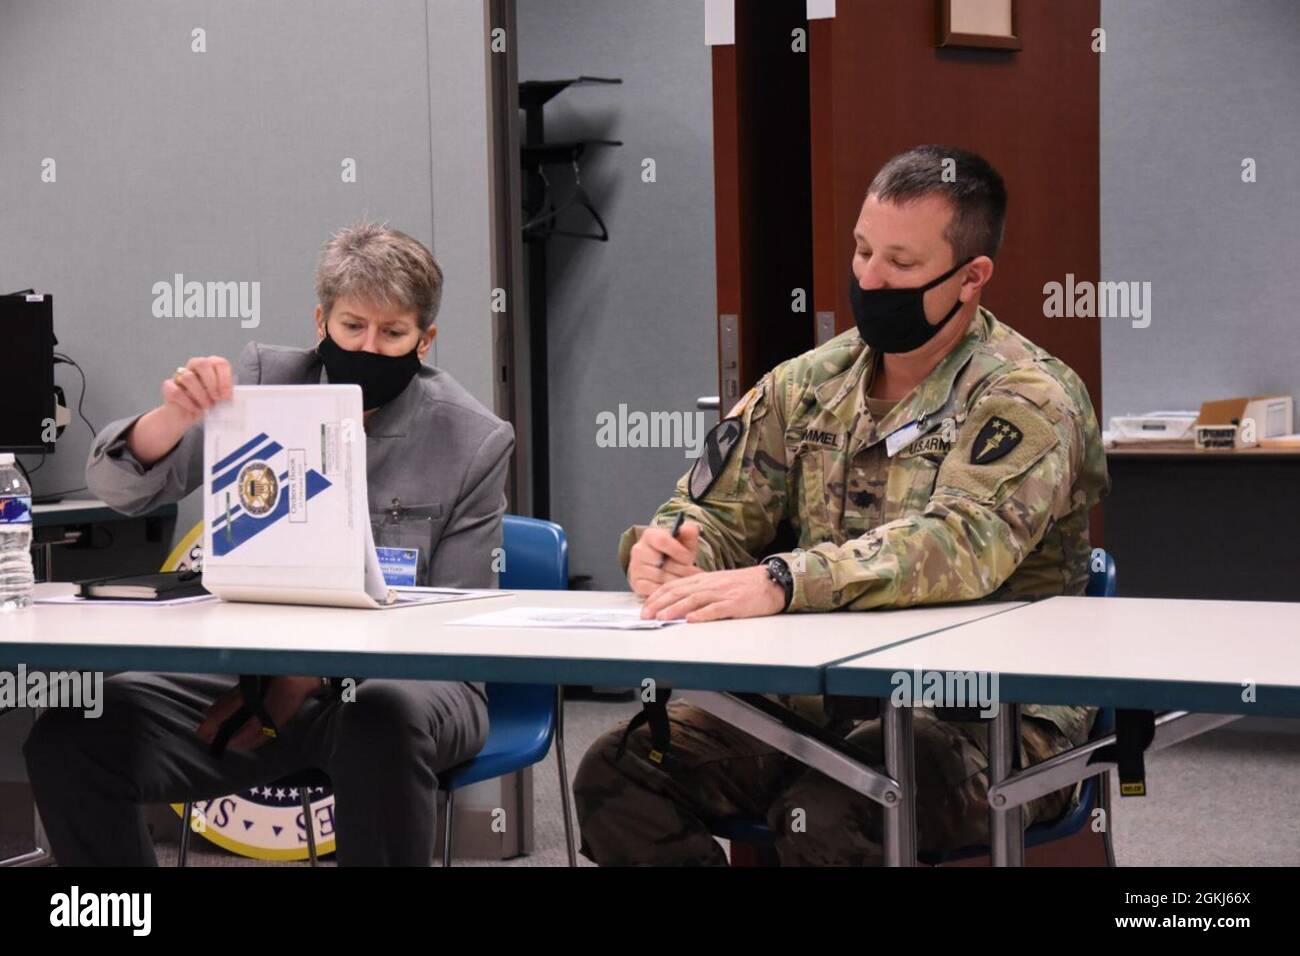 Roleplaying the Secretary of Defense, COL Stacy Tomic (left) receives a SECDEF Orders Book briefing from Army Lt. Col. Brian Hummel, as Student J35 Global Force Manager. Stock Photo